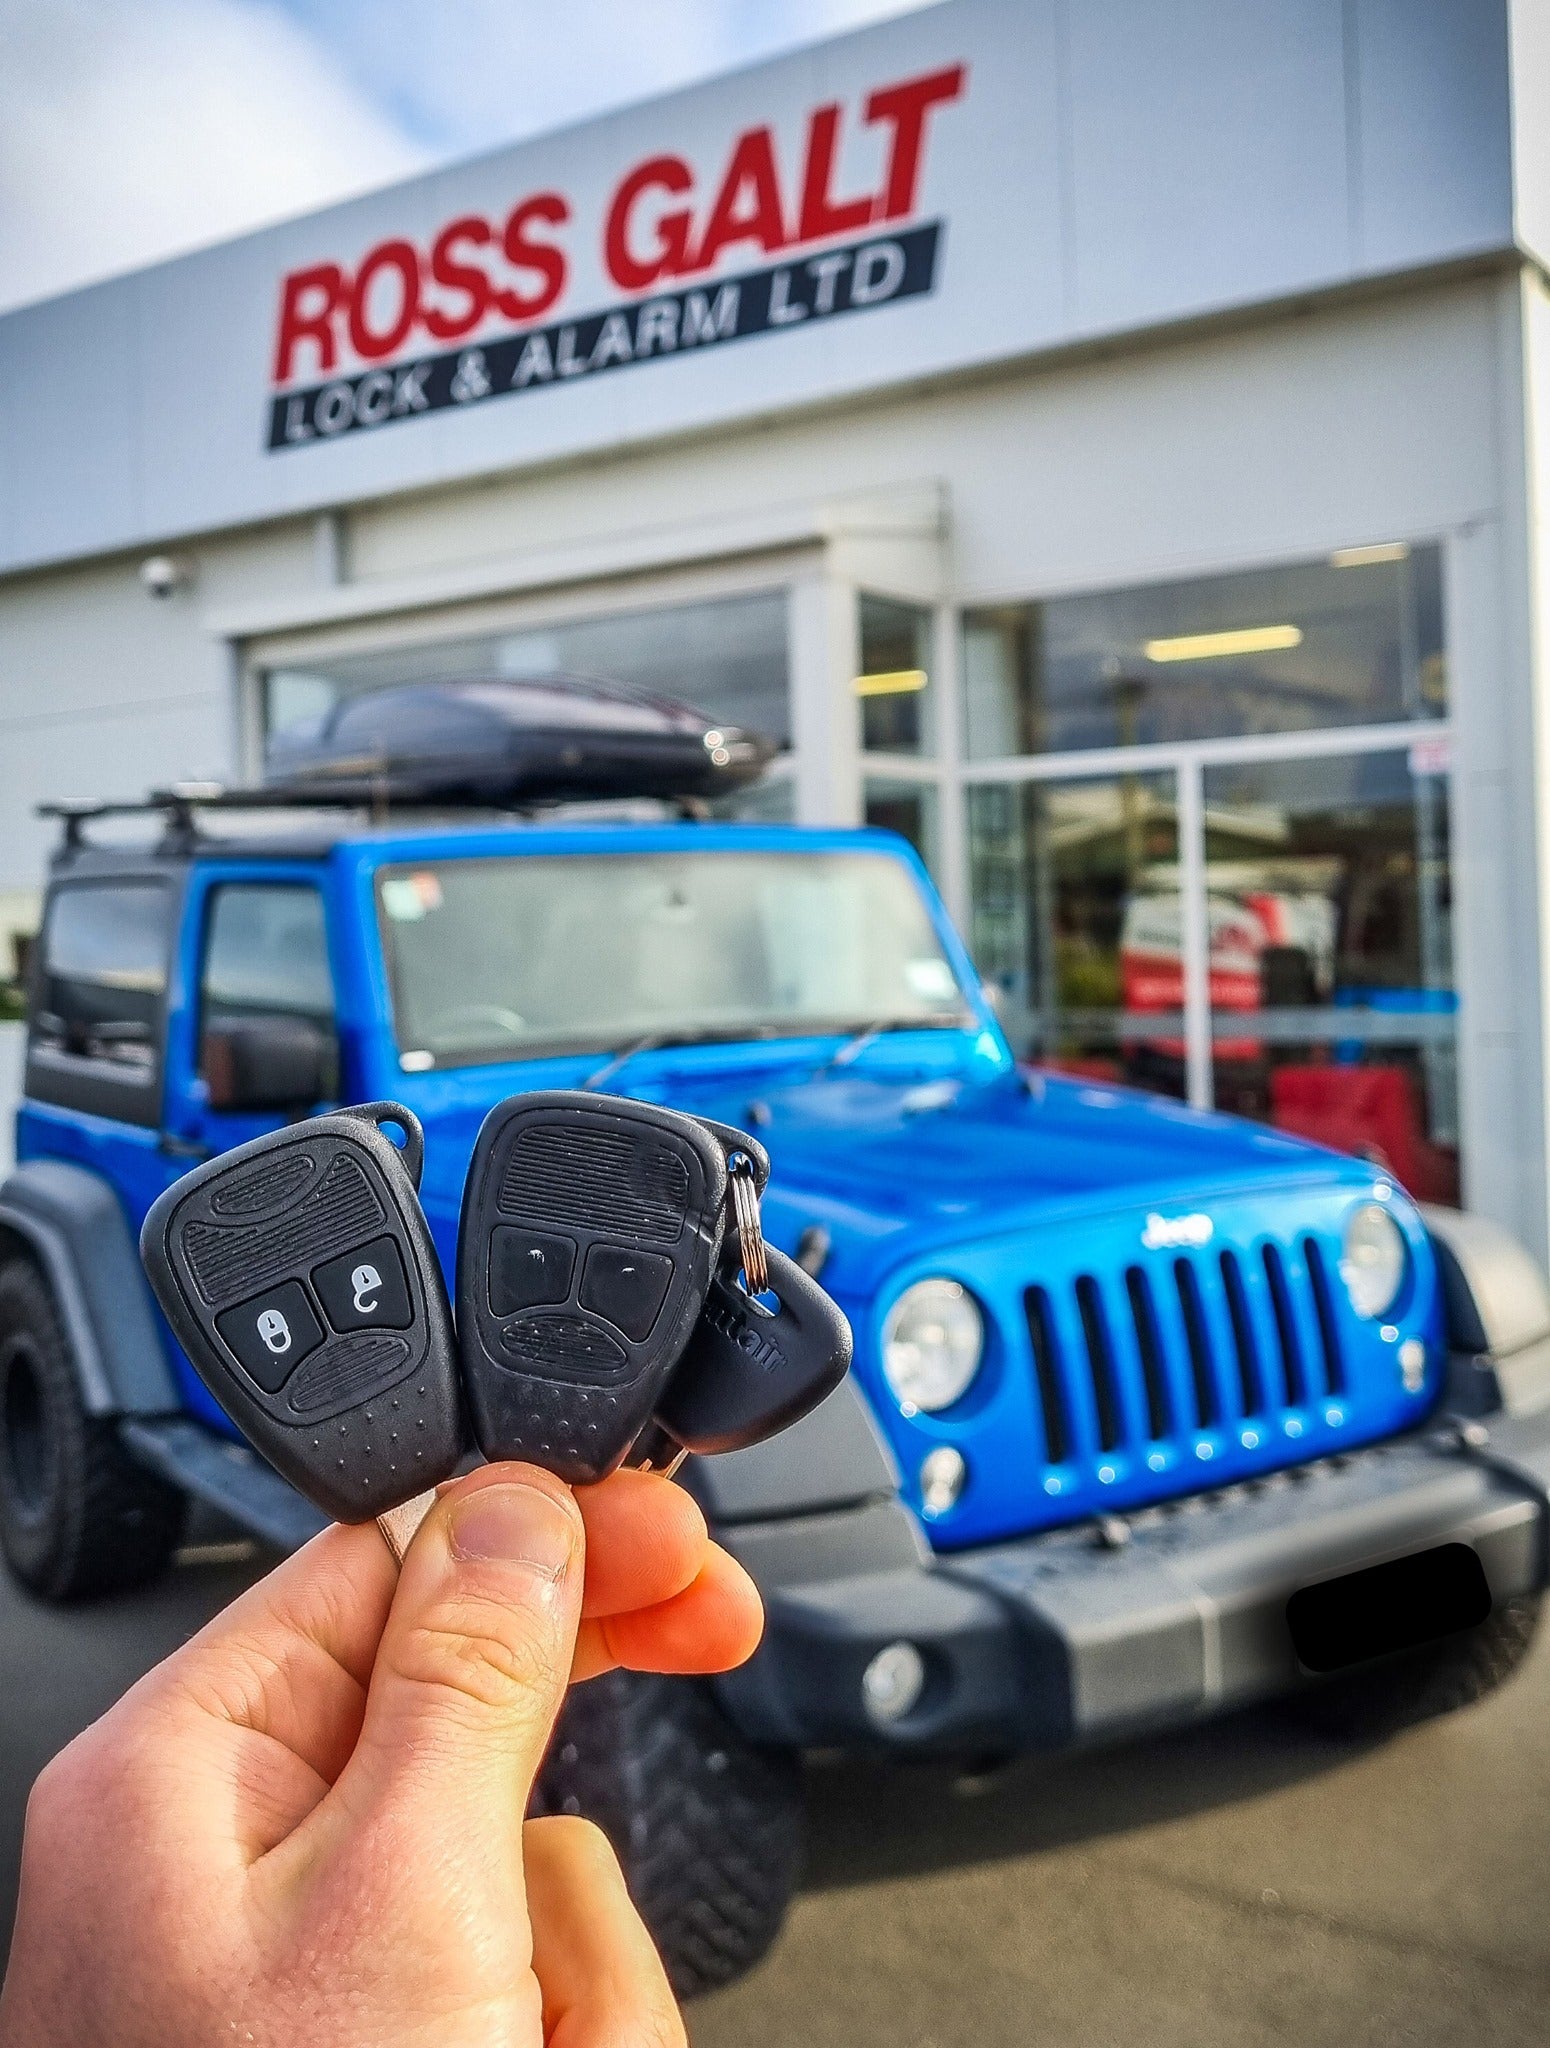 Ross Galt replacement transponder keys - from $390 on site!